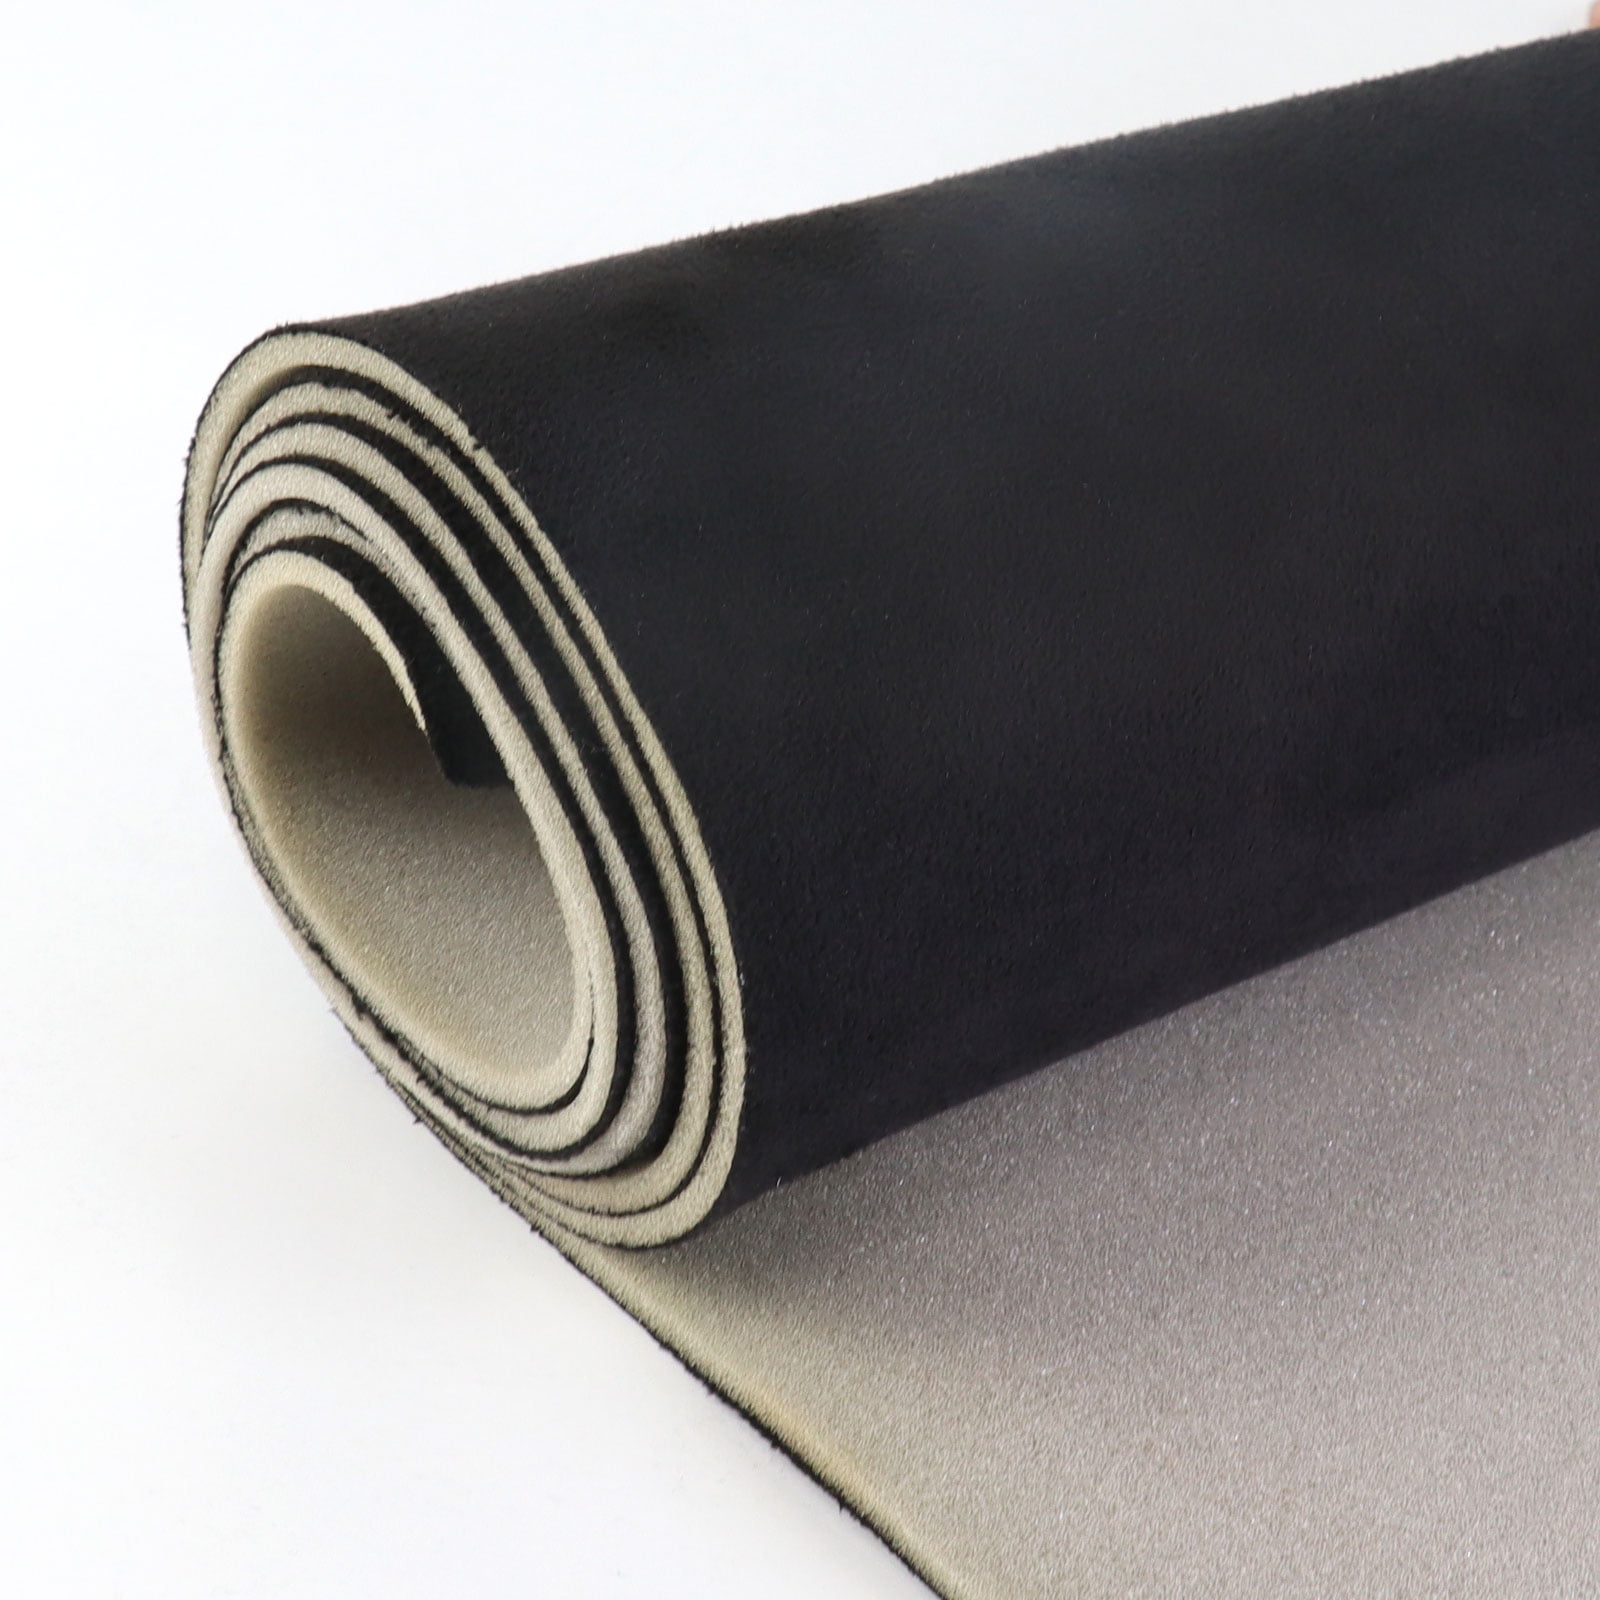 Interior Sponge Liner Headliners Fabric Suede Black 120inch Length  Remedy/Replace Roof DIY [LAHFS074BLK60120] - $92.99 : MaxProofing, Home  Decor,Upholstery Fabric, Privacy Window Film & Accessories Wholesale